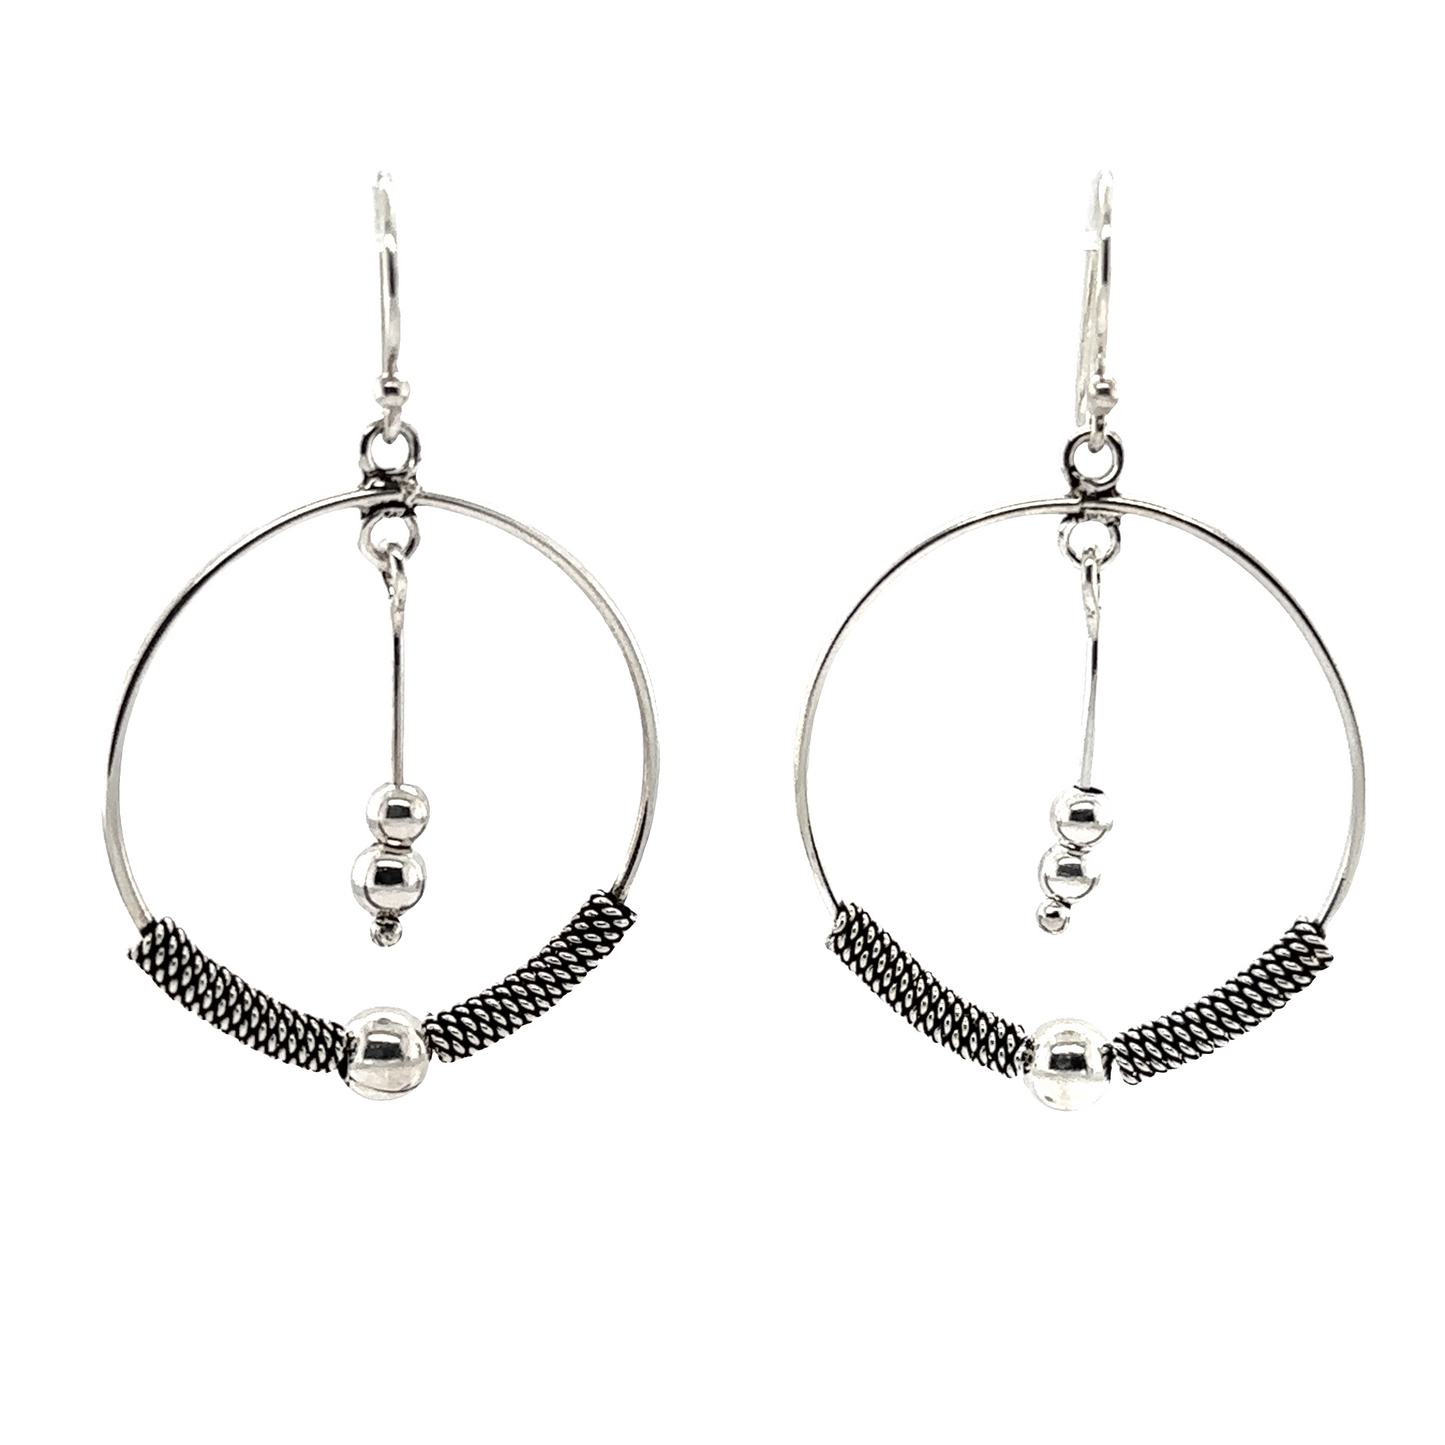 A pair of Bali Style Circle Drop Earrings with Tassel from Super Silver.